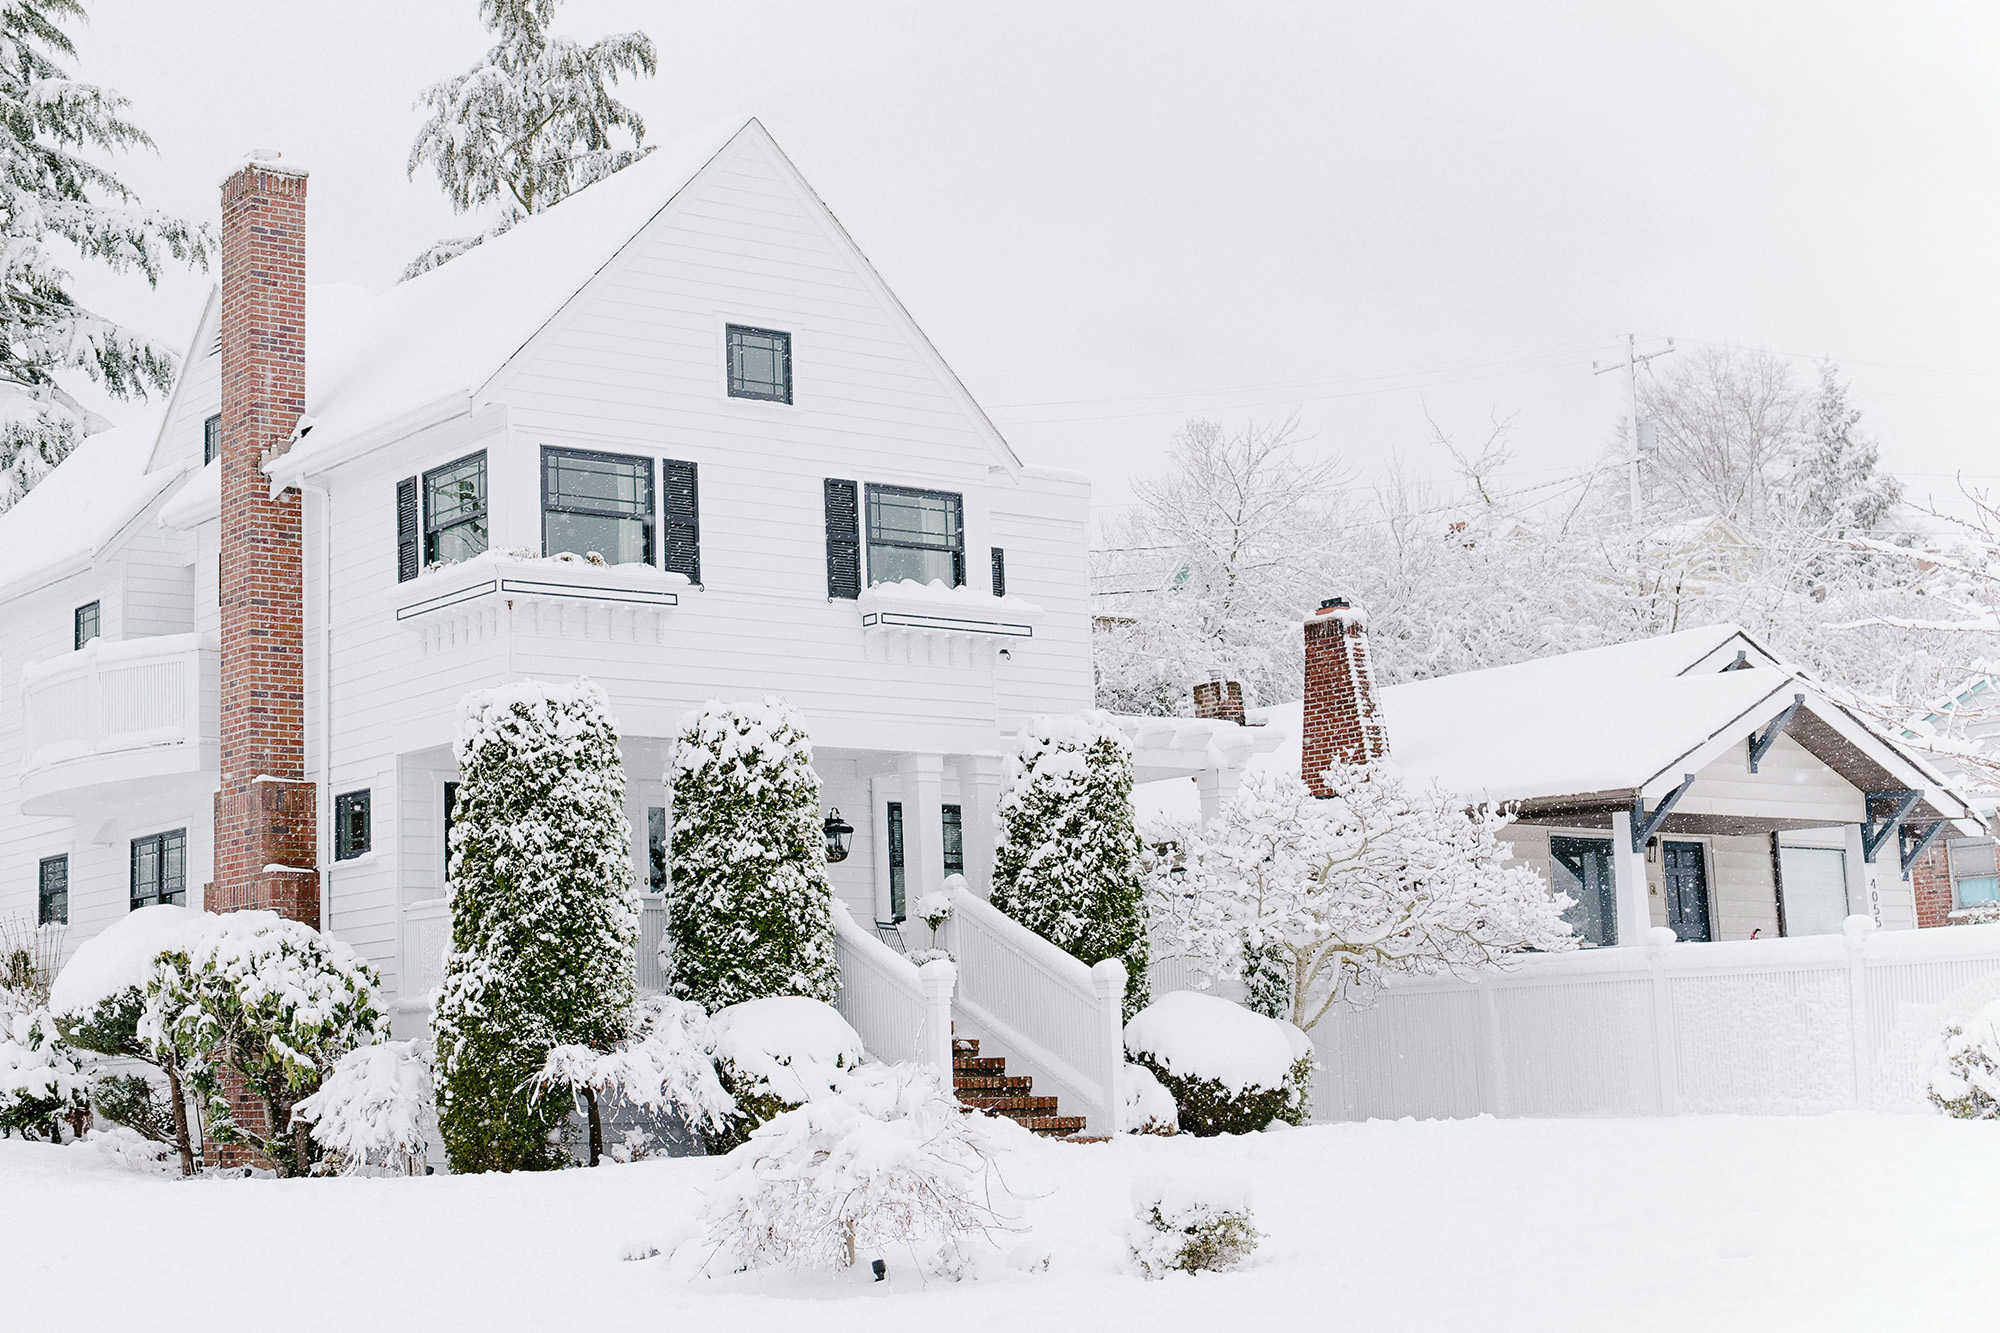 Tips for Repairing Common Winter Roofing Issues Effectively